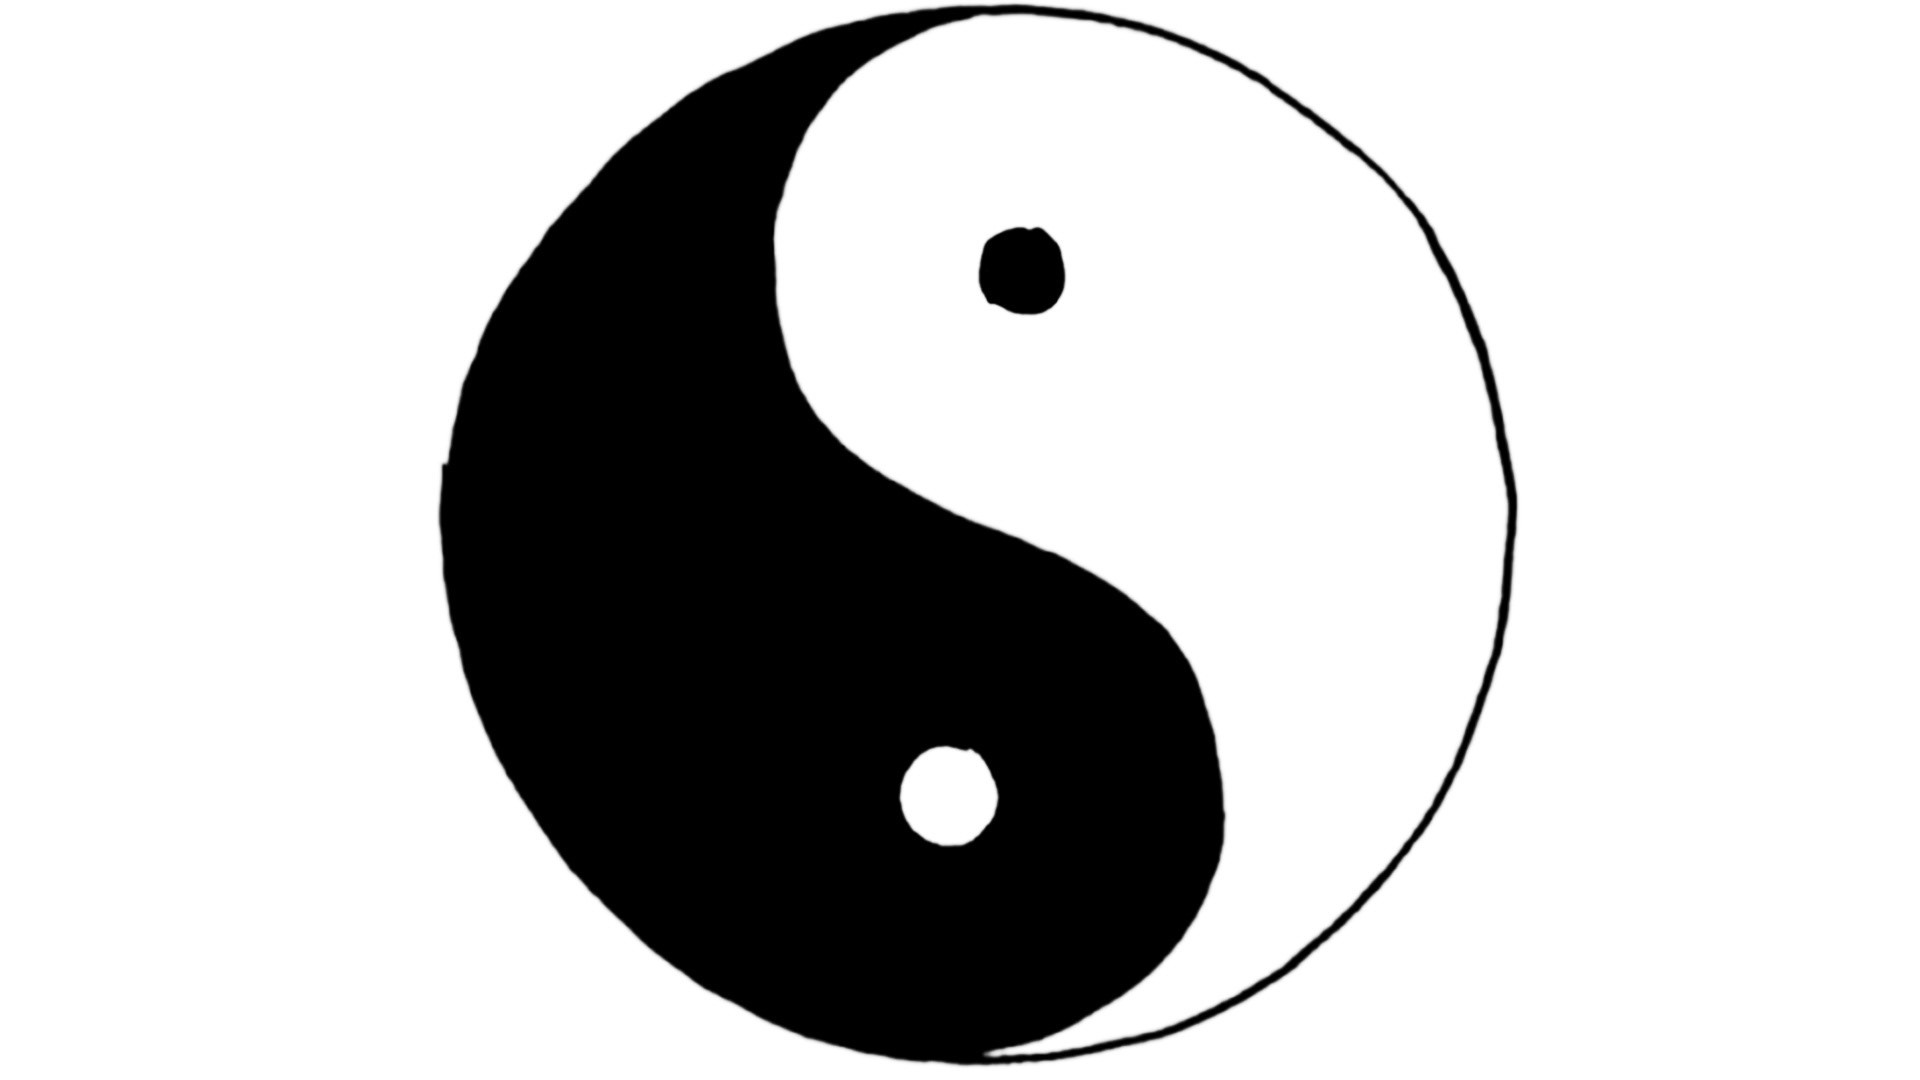 1920x1080 The hidden meanings of yin and yang - John Bellaimey